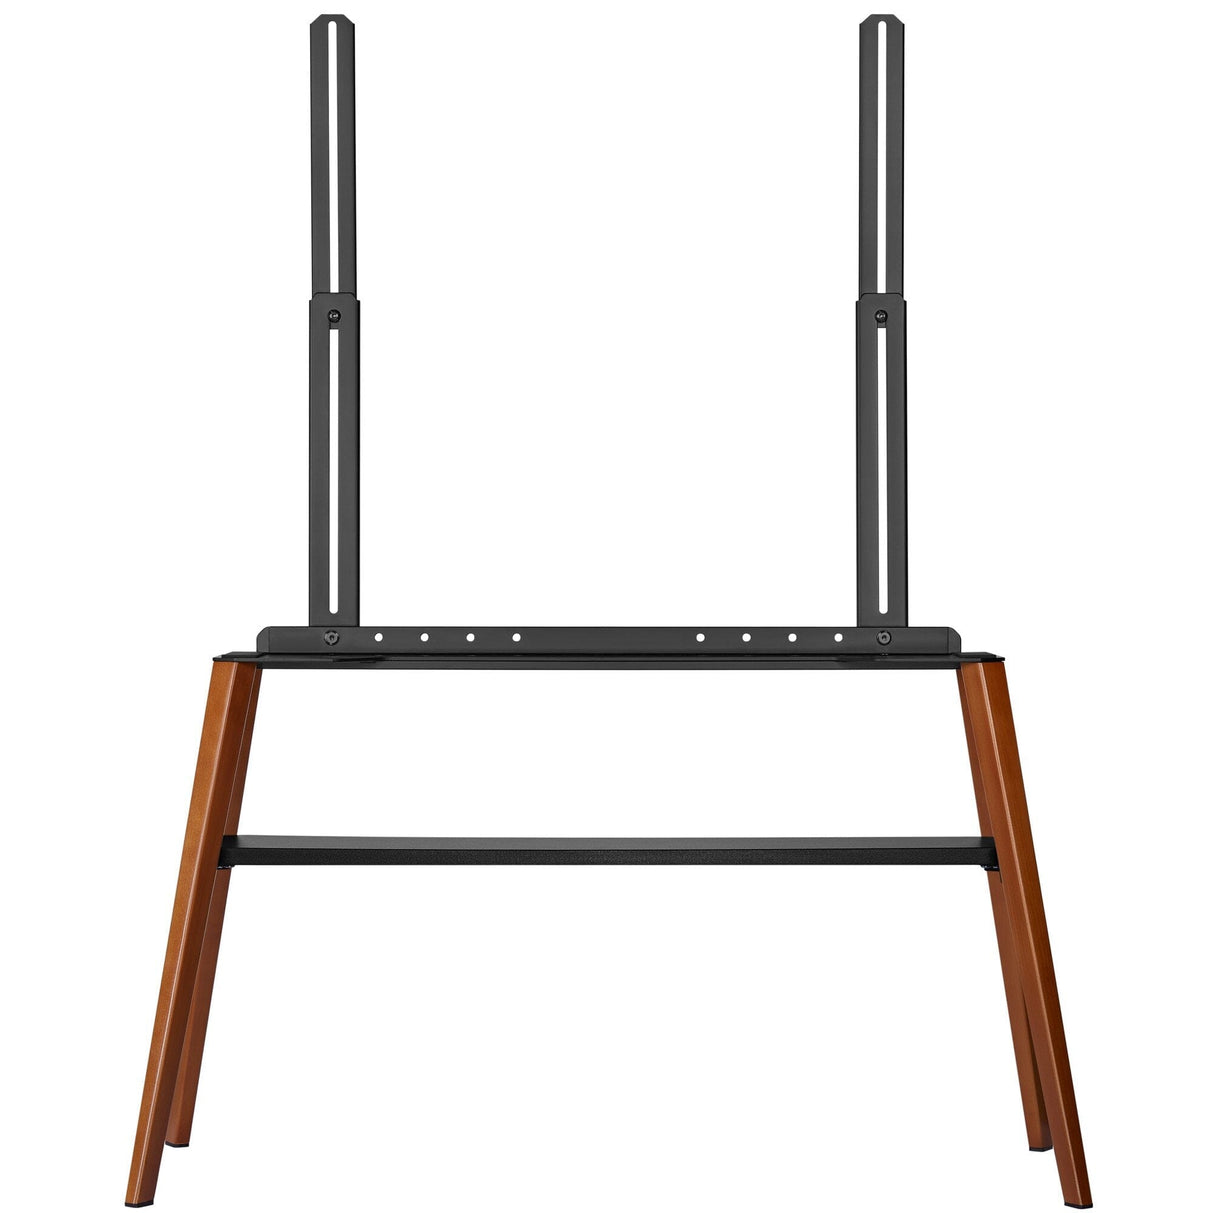 TTAP Roma-Dark TV Stand with Bracket for up to 75" TVs